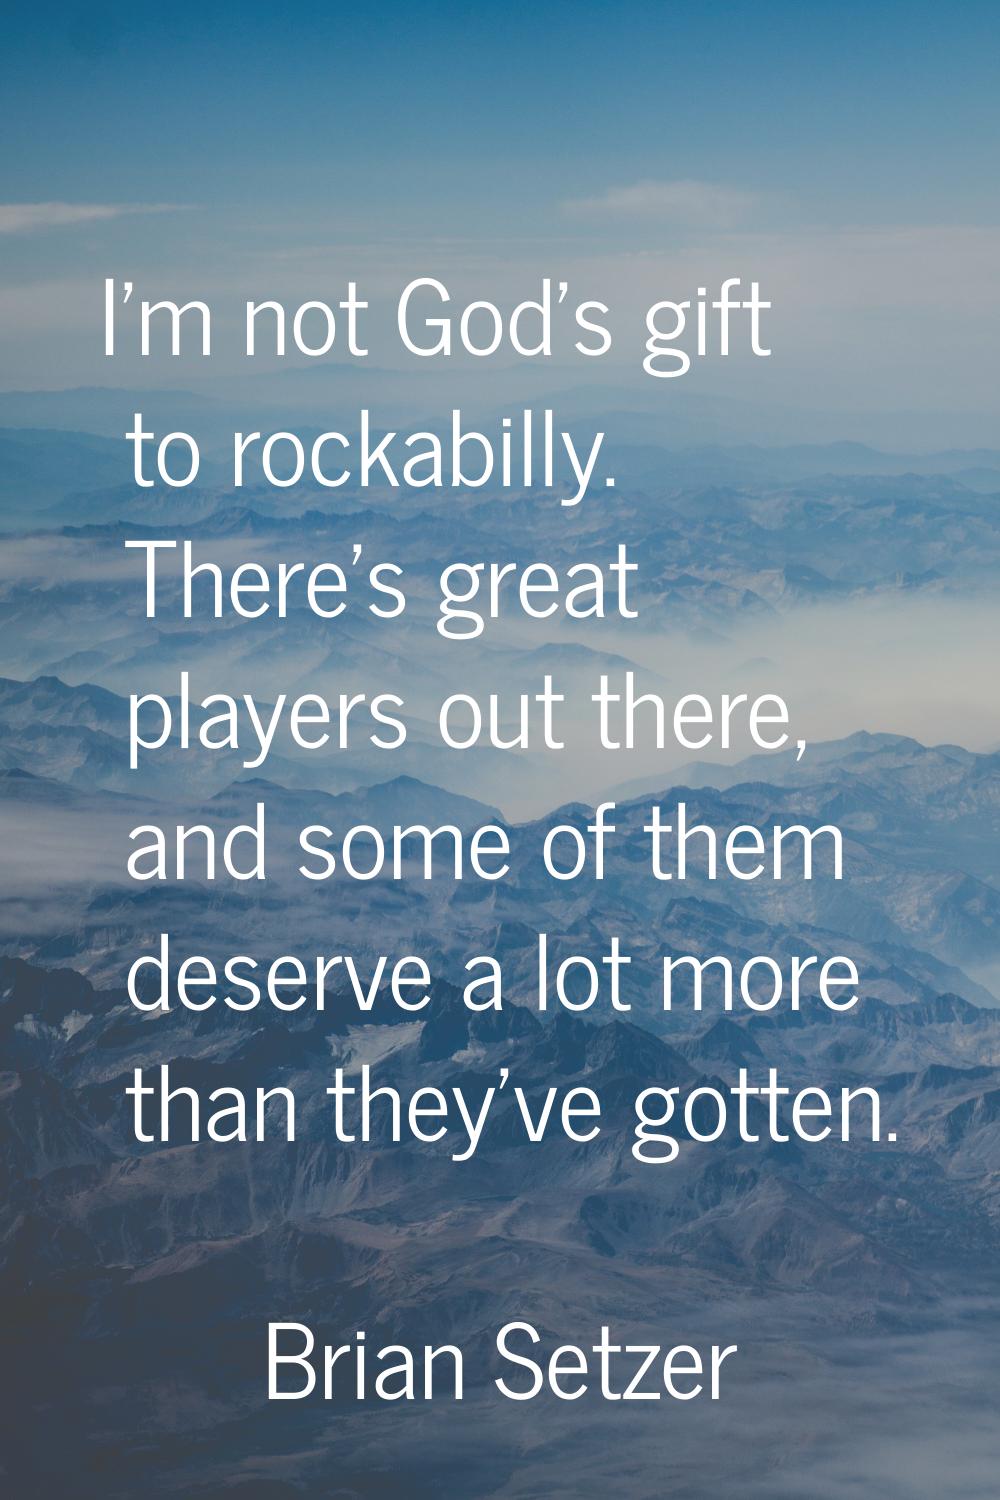 I'm not God's gift to rockabilly. There's great players out there, and some of them deserve a lot m